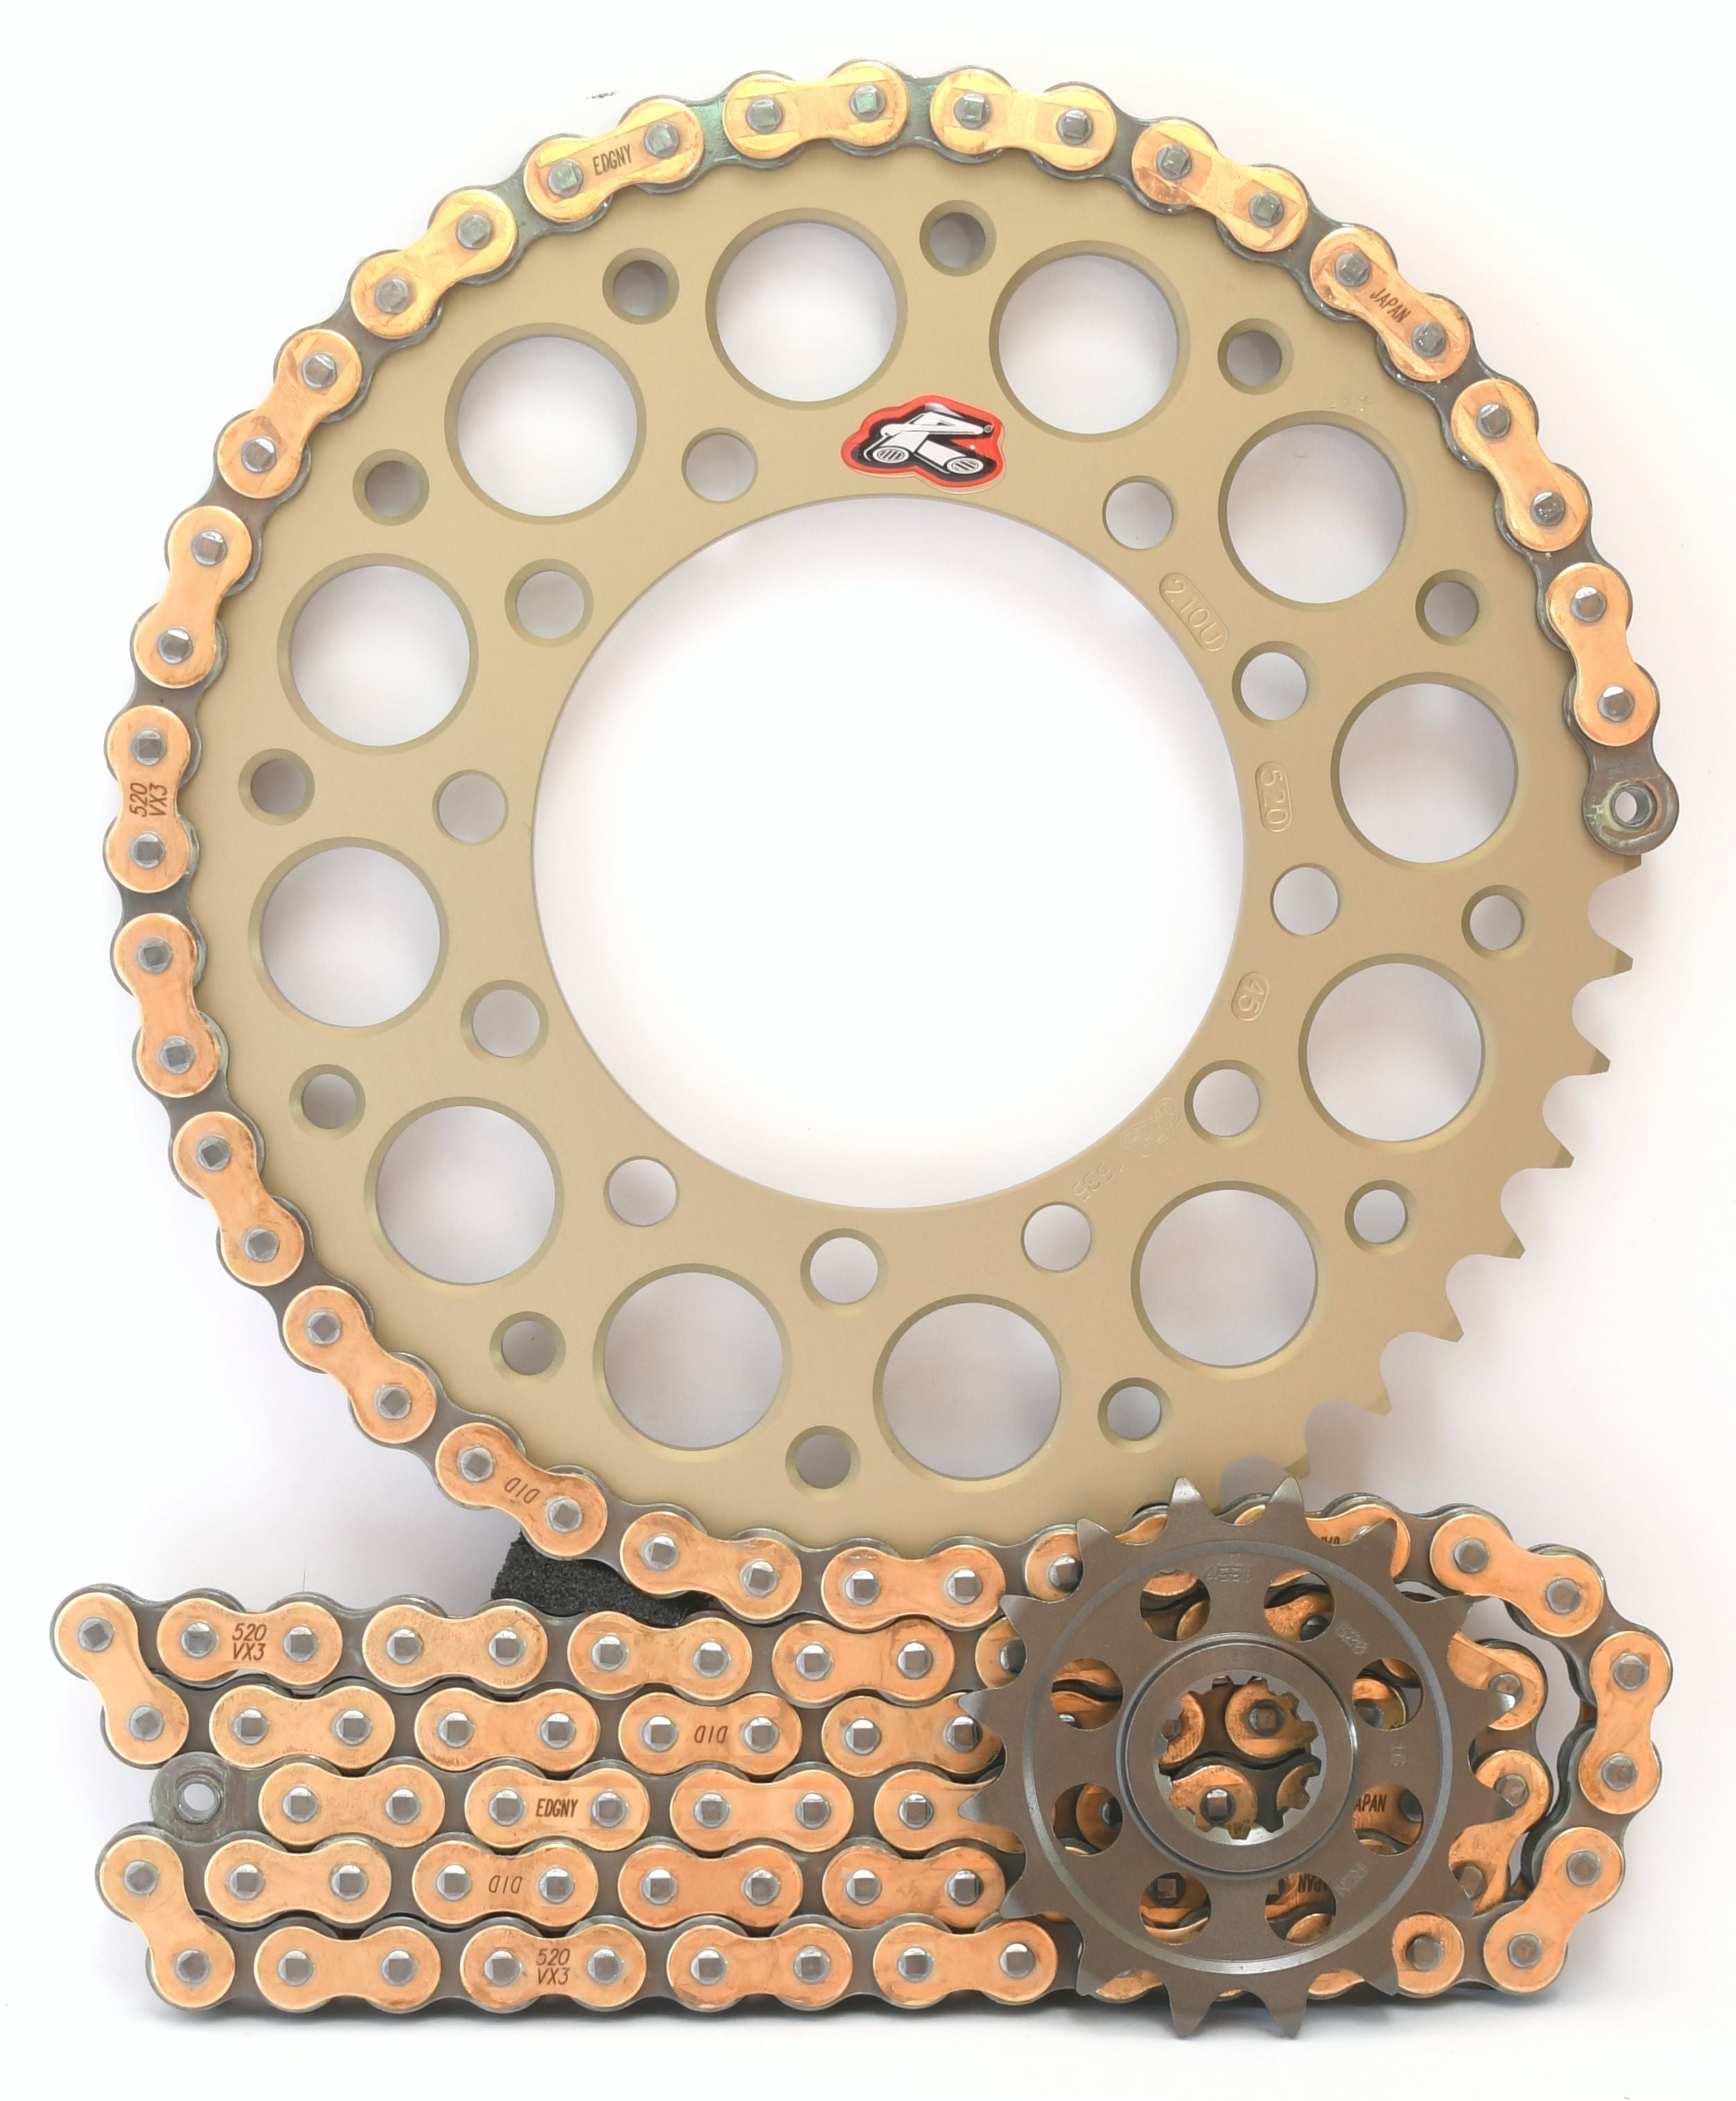 Renthal Ultralight and DID 520 Conversion Chain & Sprocket Kit for Kawasaki ZX10R 2021> - Standard Gearing